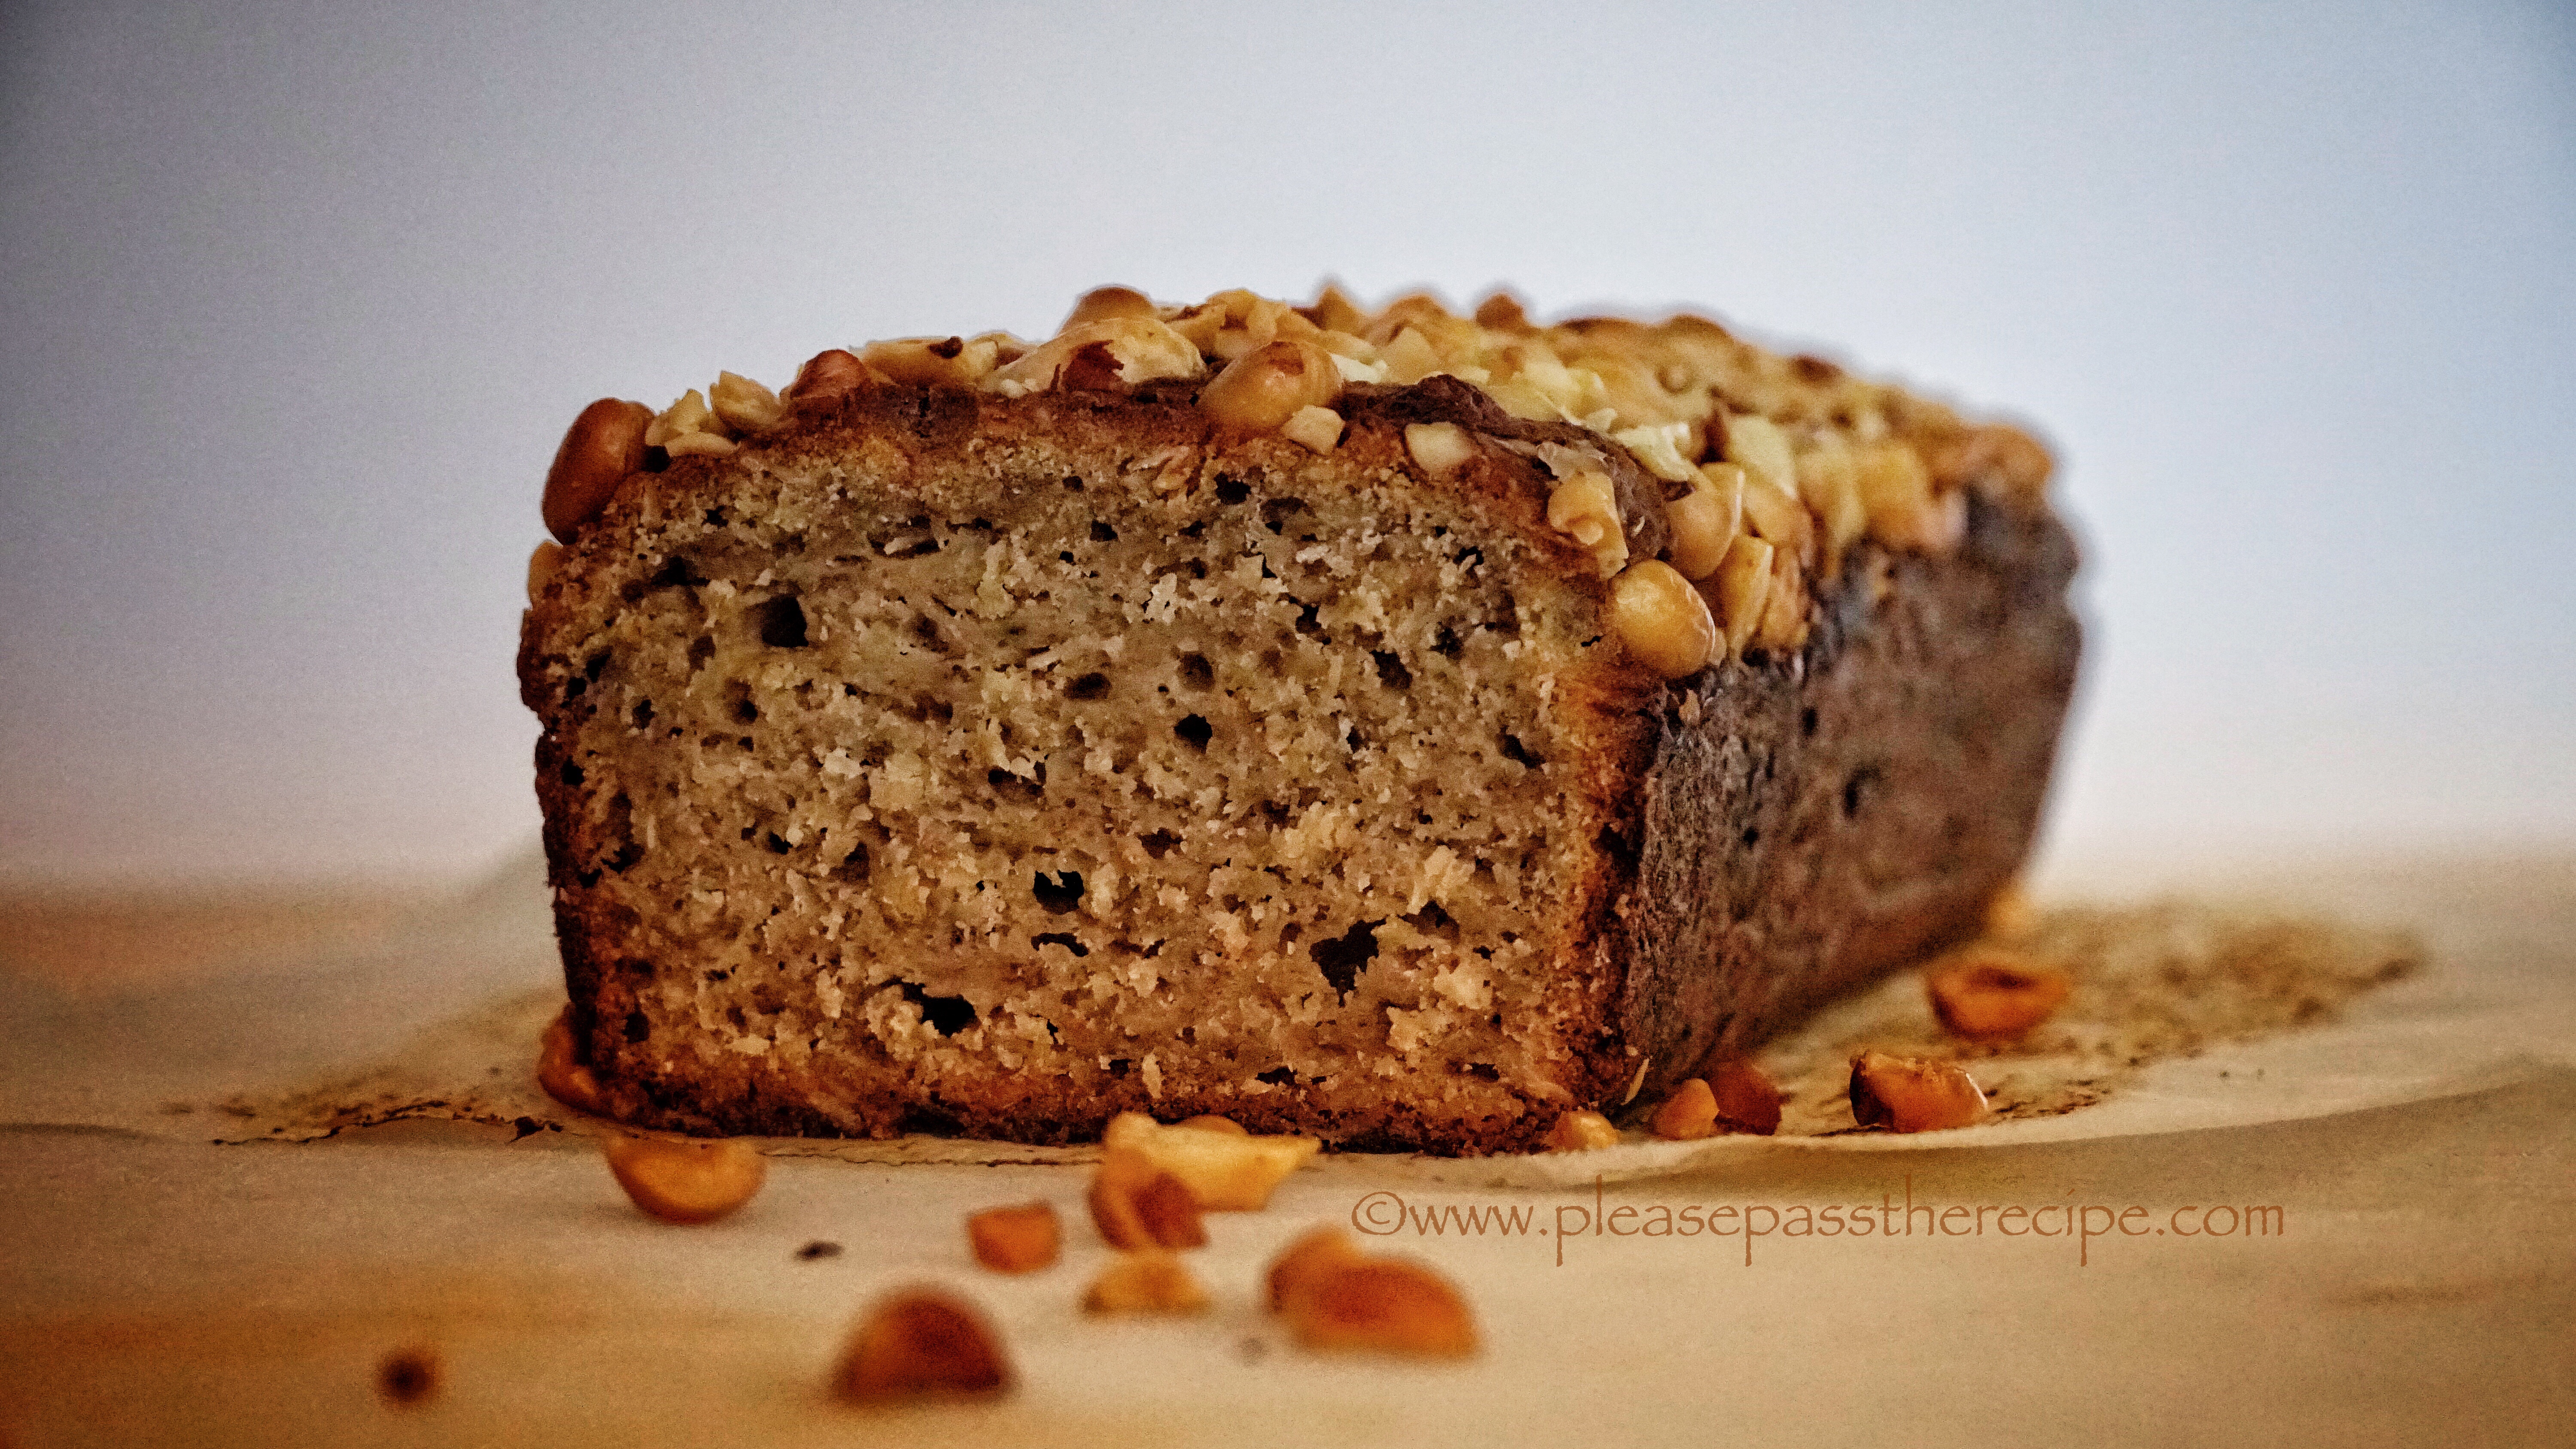 Peanut Butter and Banana Loaf